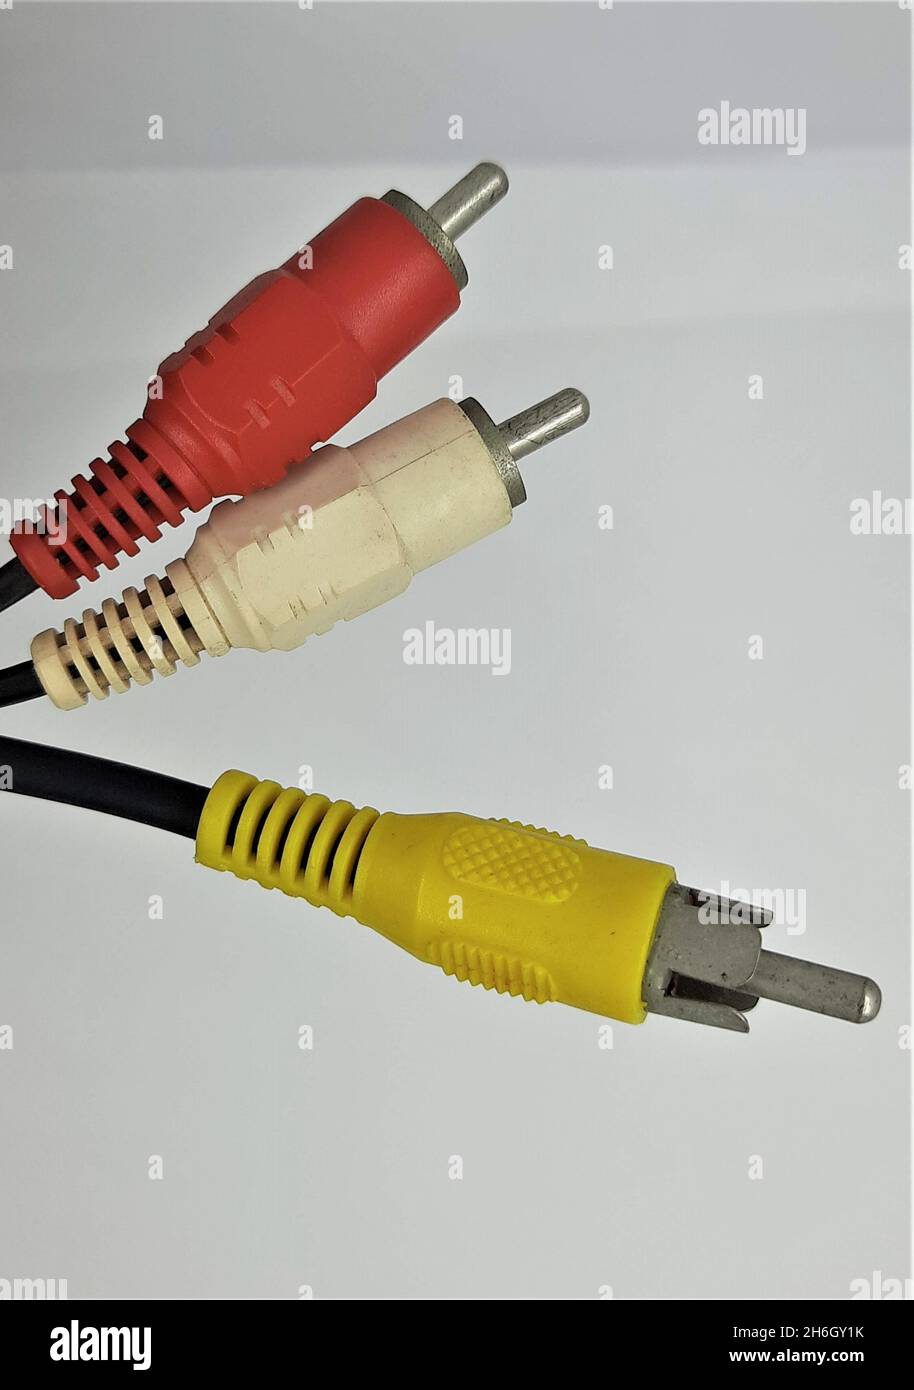 audio video RCA cable for video and audio data transmission Stock Photo